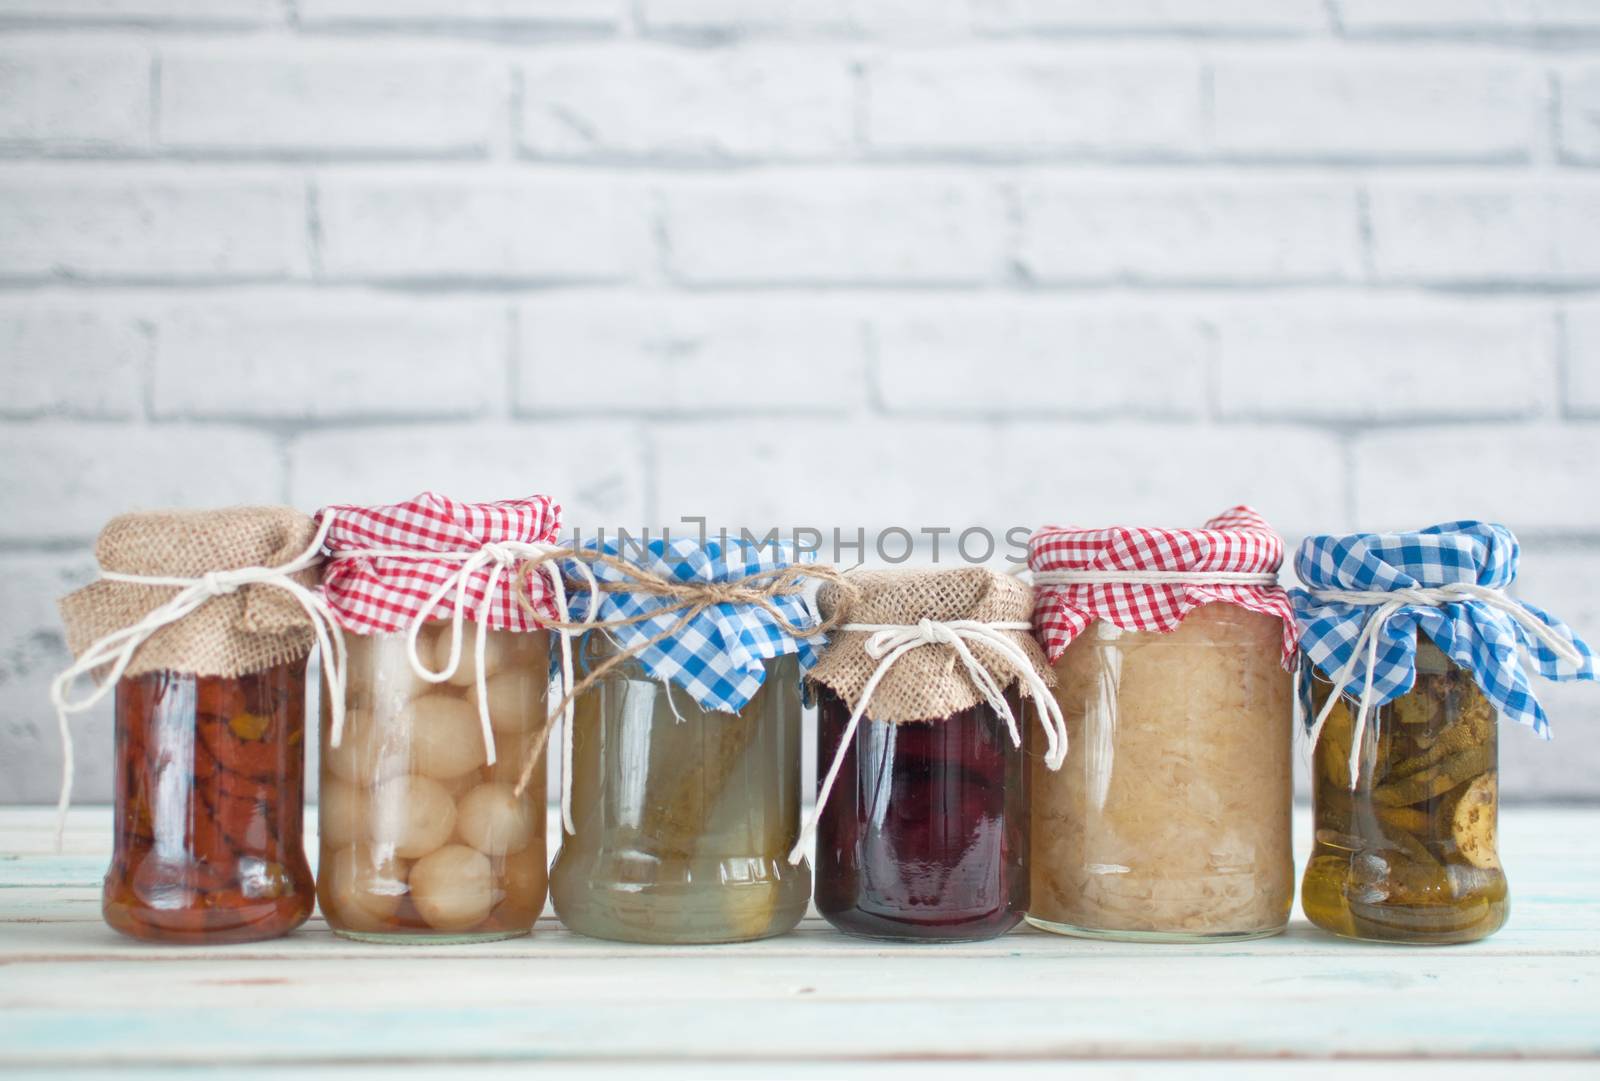 Fermented food collection by unikpix